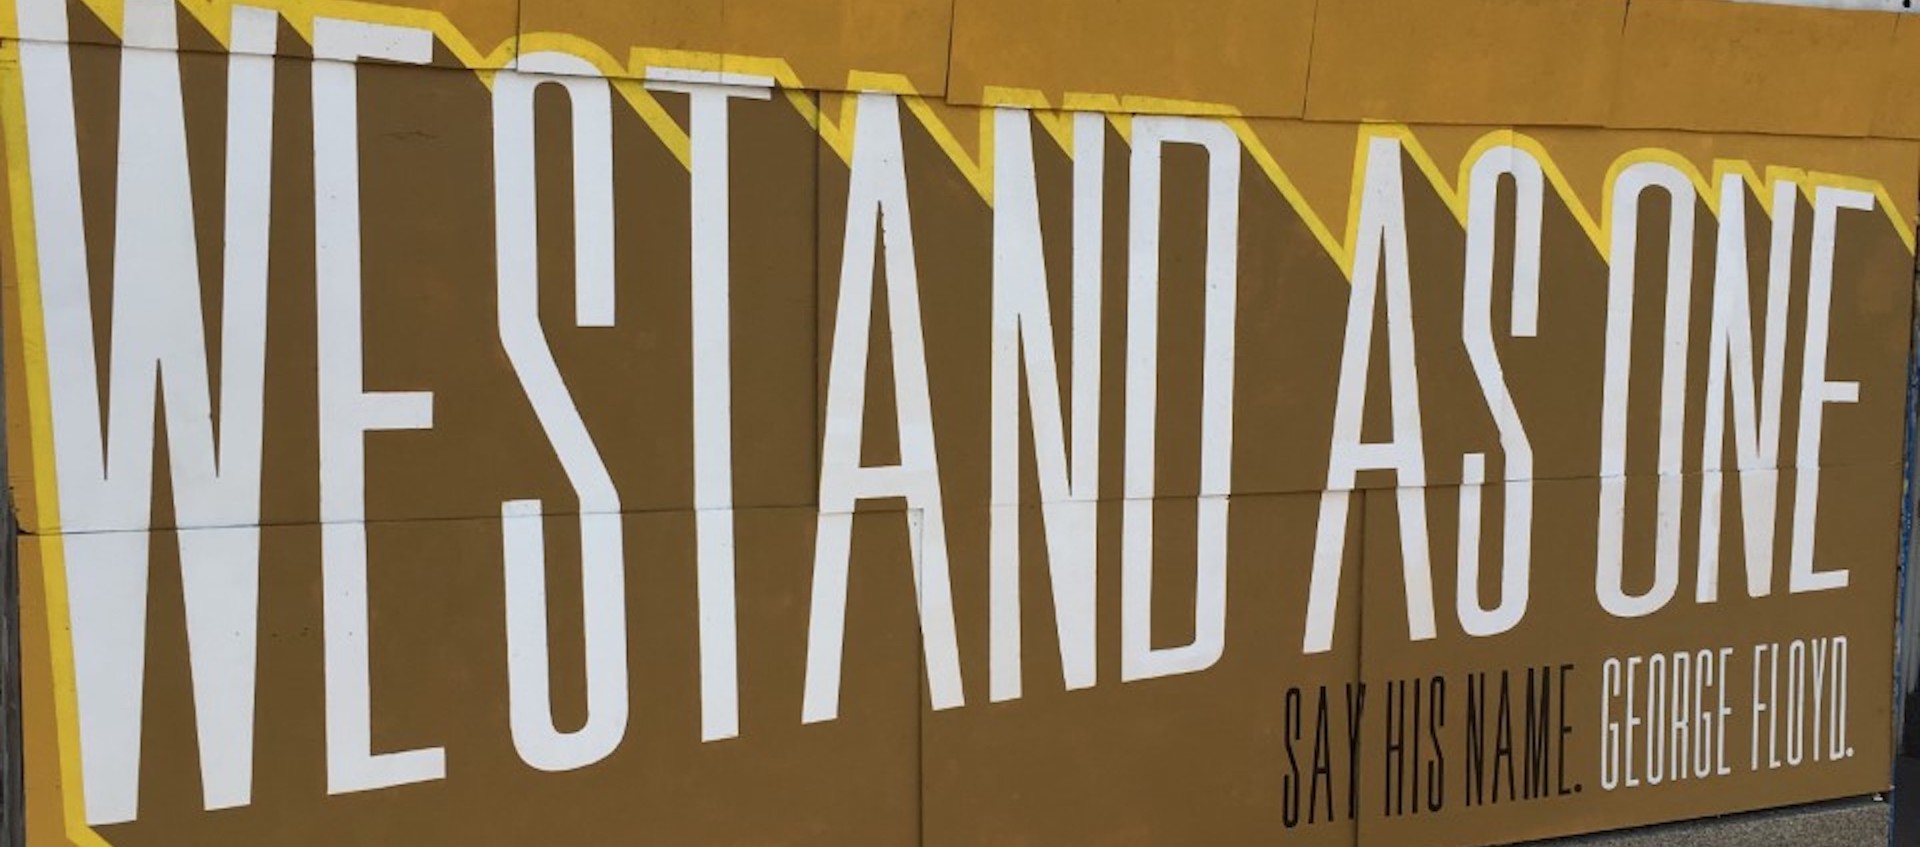 A mural that reads "we stand as one" painted on boards used to cover front windows of a pawn shop during the Columbus George Floyd protests in June 2020. Mural organized by Flat Black Commercial Visuals